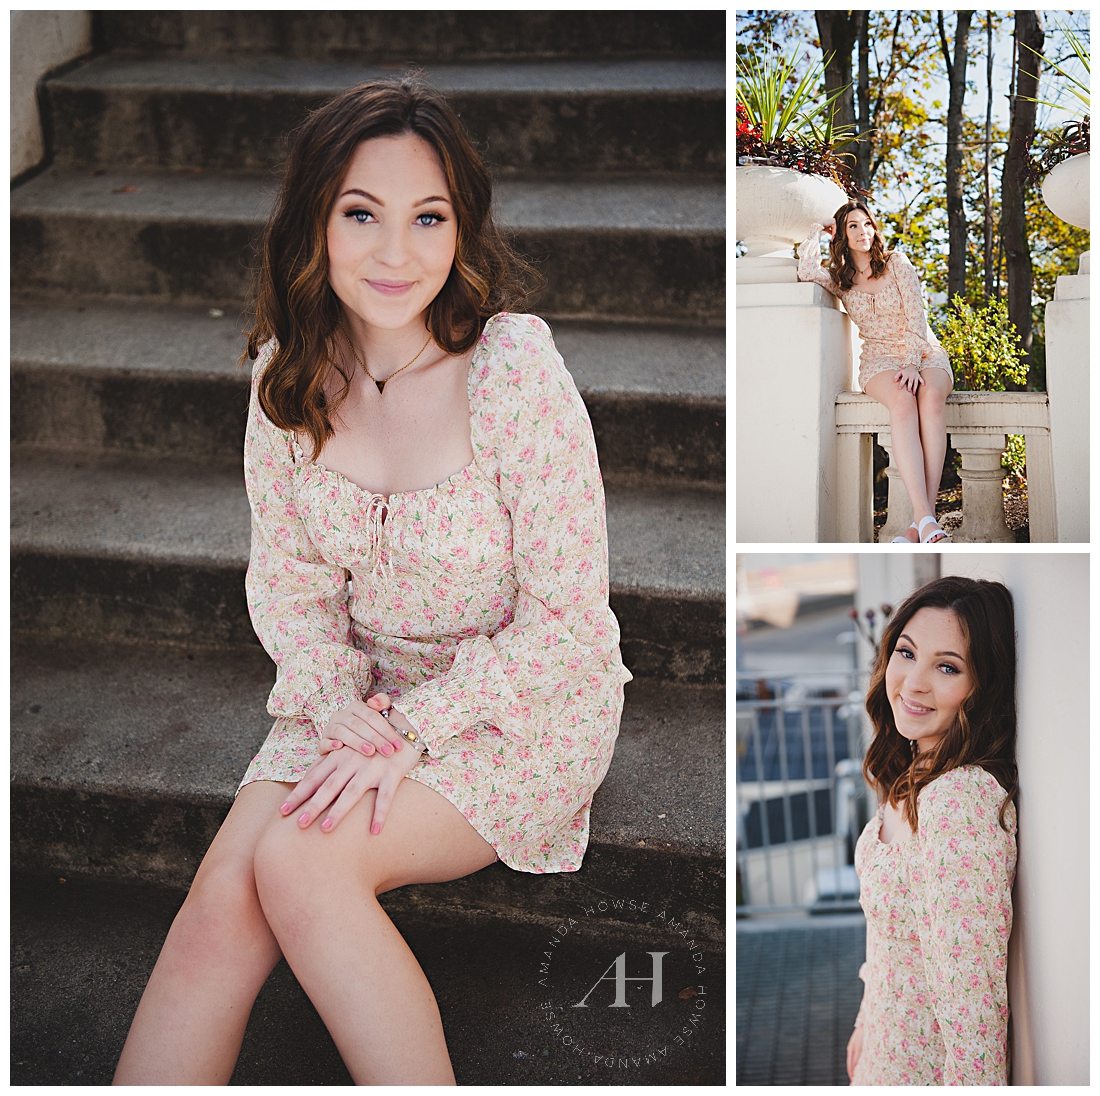 October Senior Portraits in Tacoma | Floral Dress for Senior Portraits, Outfit Ideas, Hair and Makeup Inspo | Photographed by the Best Tacoma Senior Photographer Amanda Howse